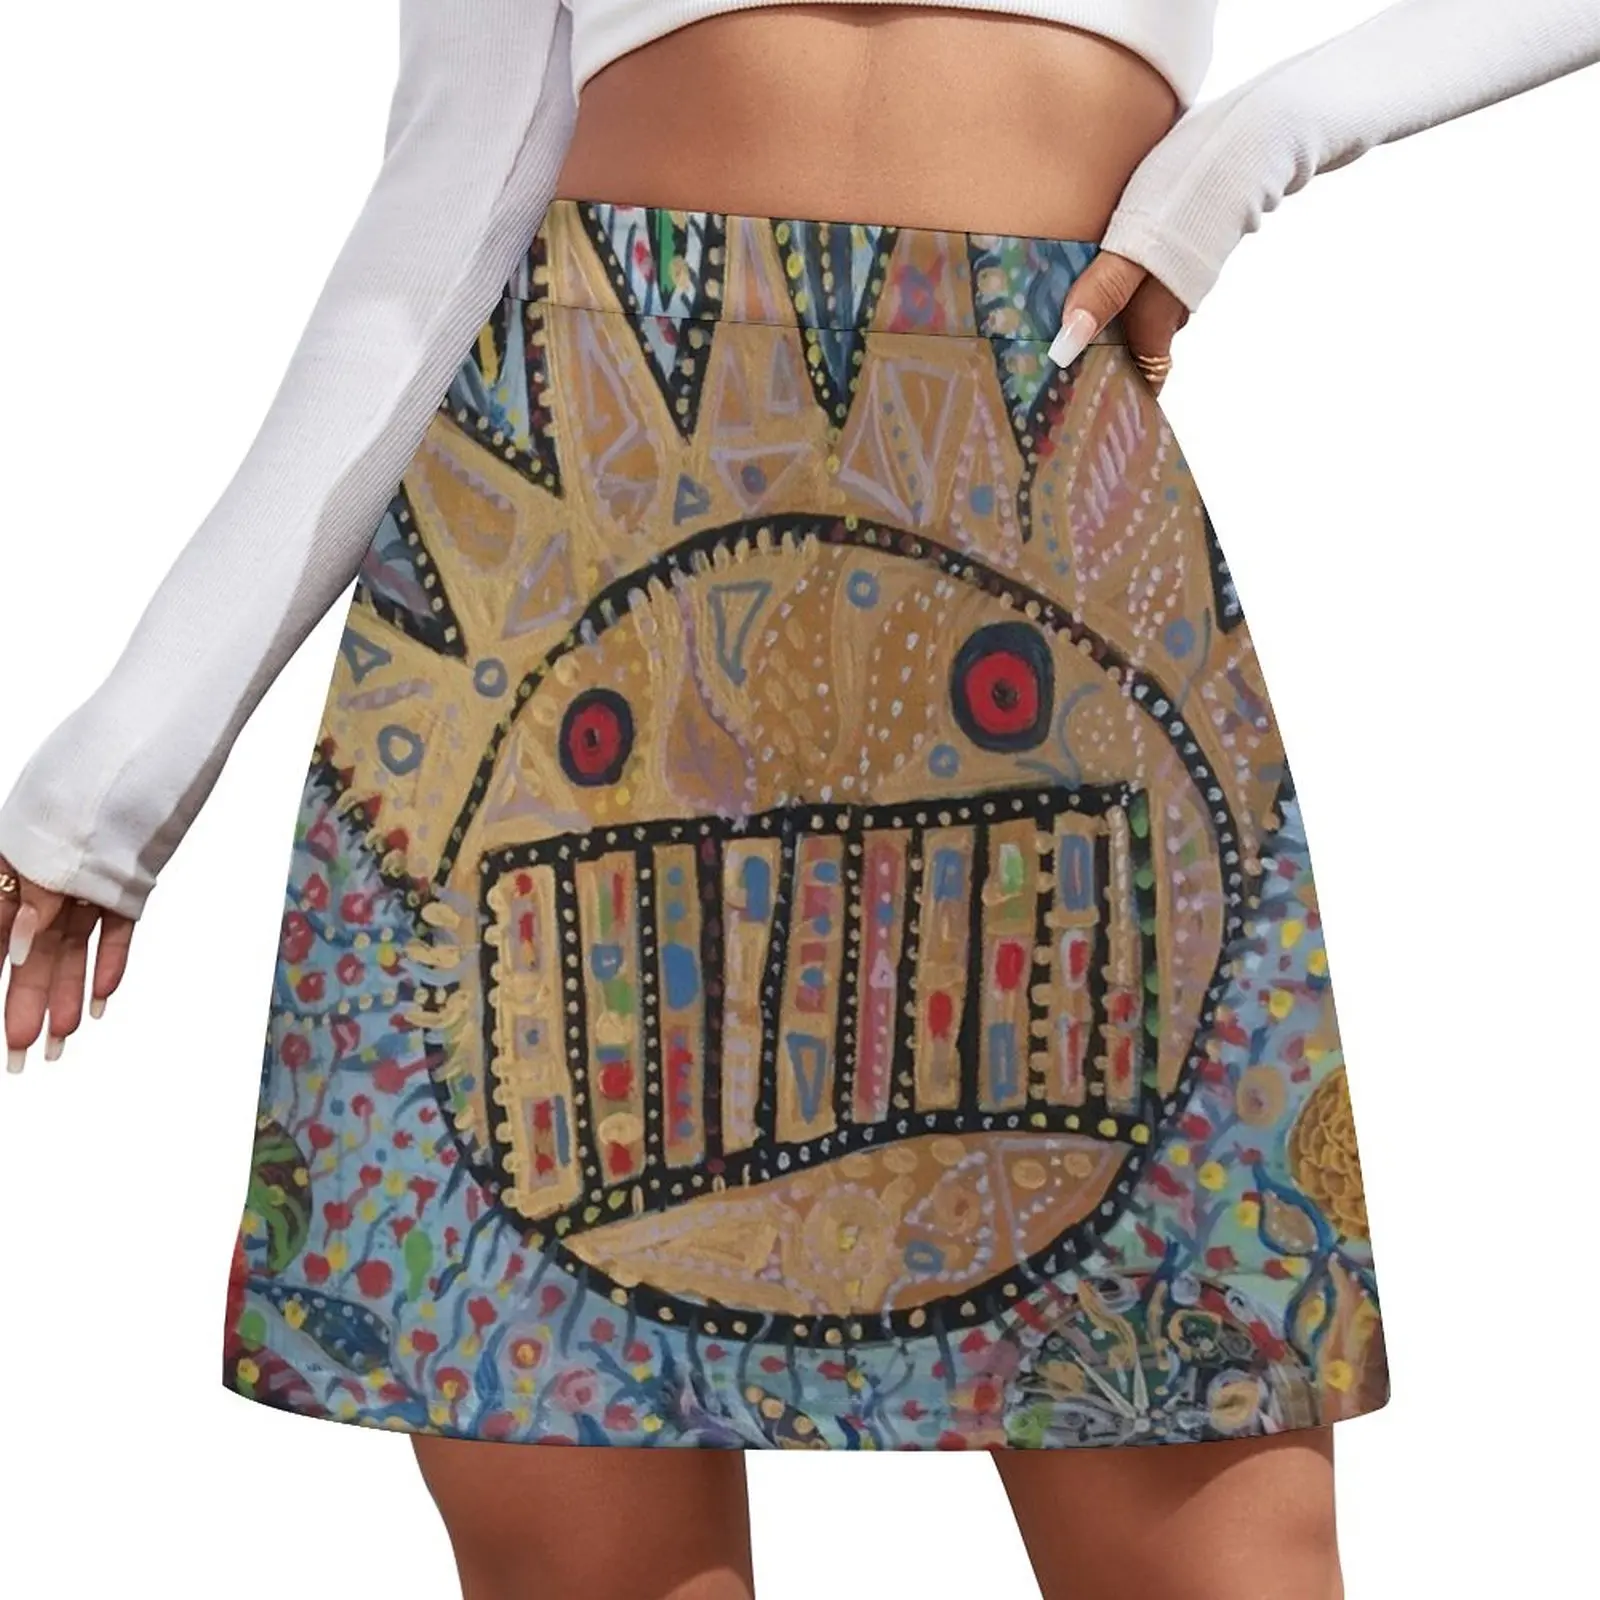 Ween Boognish and flowers Mini Skirt skirts summer 2024 woman extreme mini dress